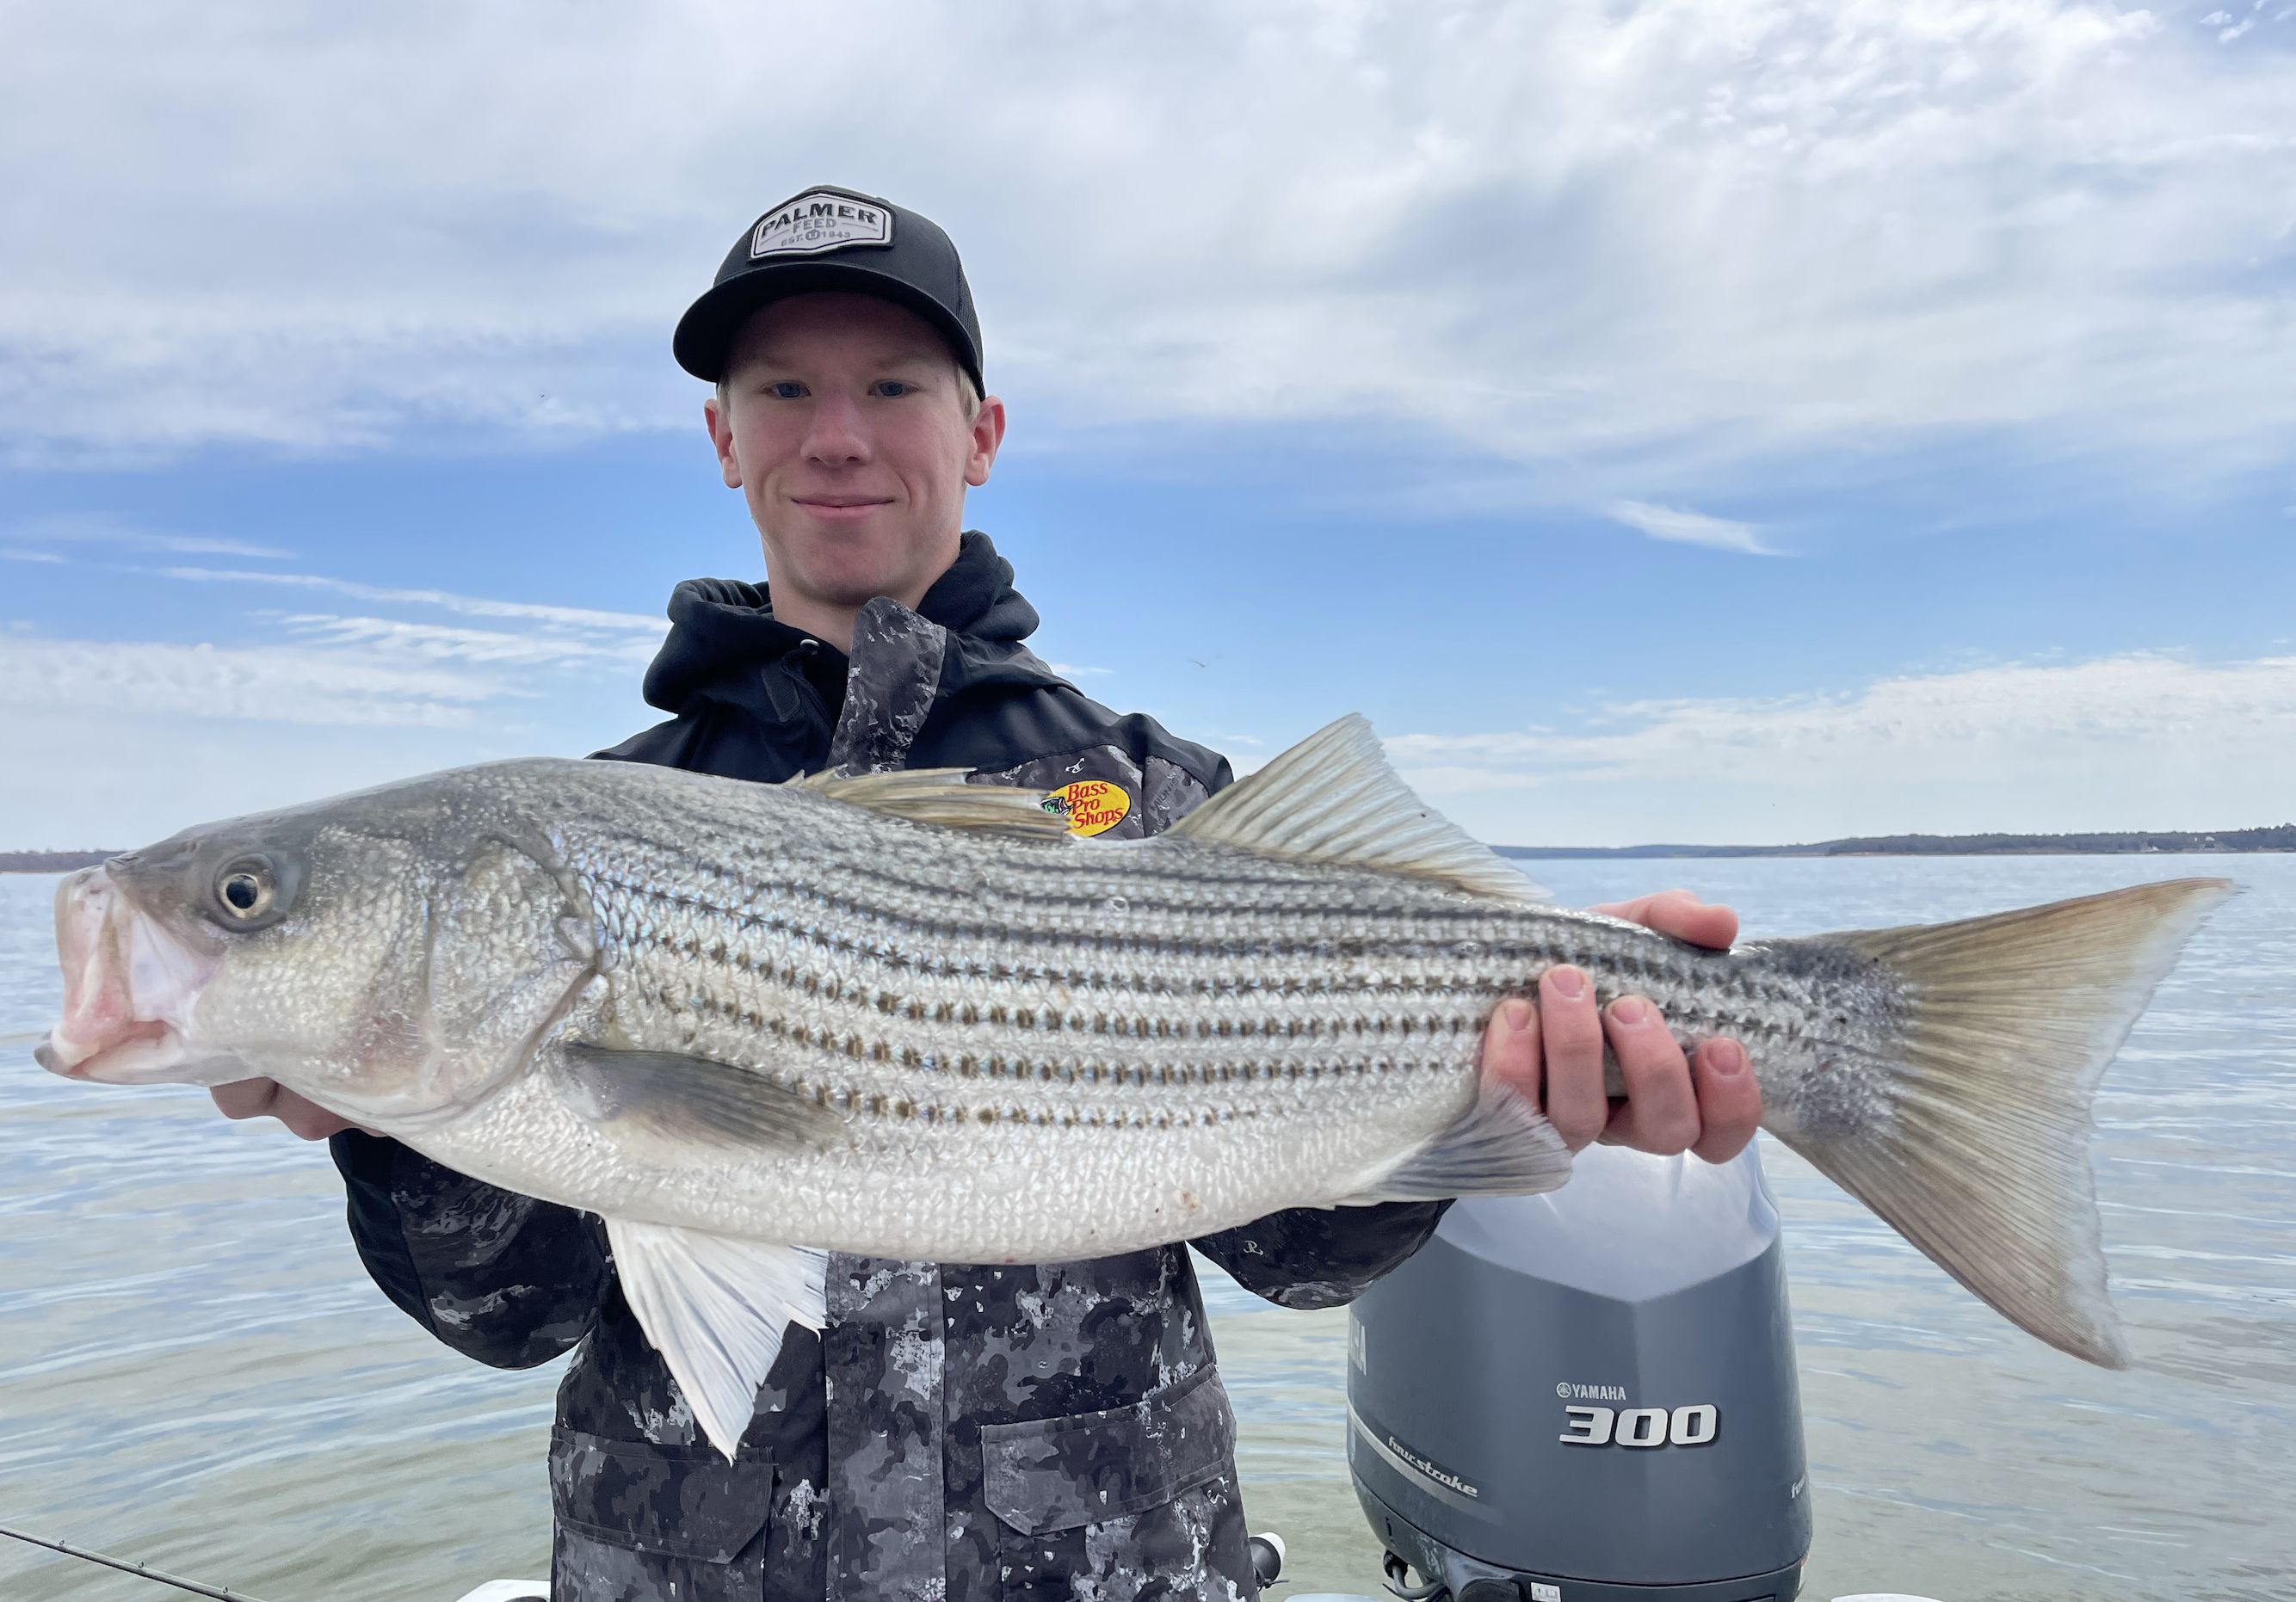 Cold outside? Let's fish for striper bass, Sports